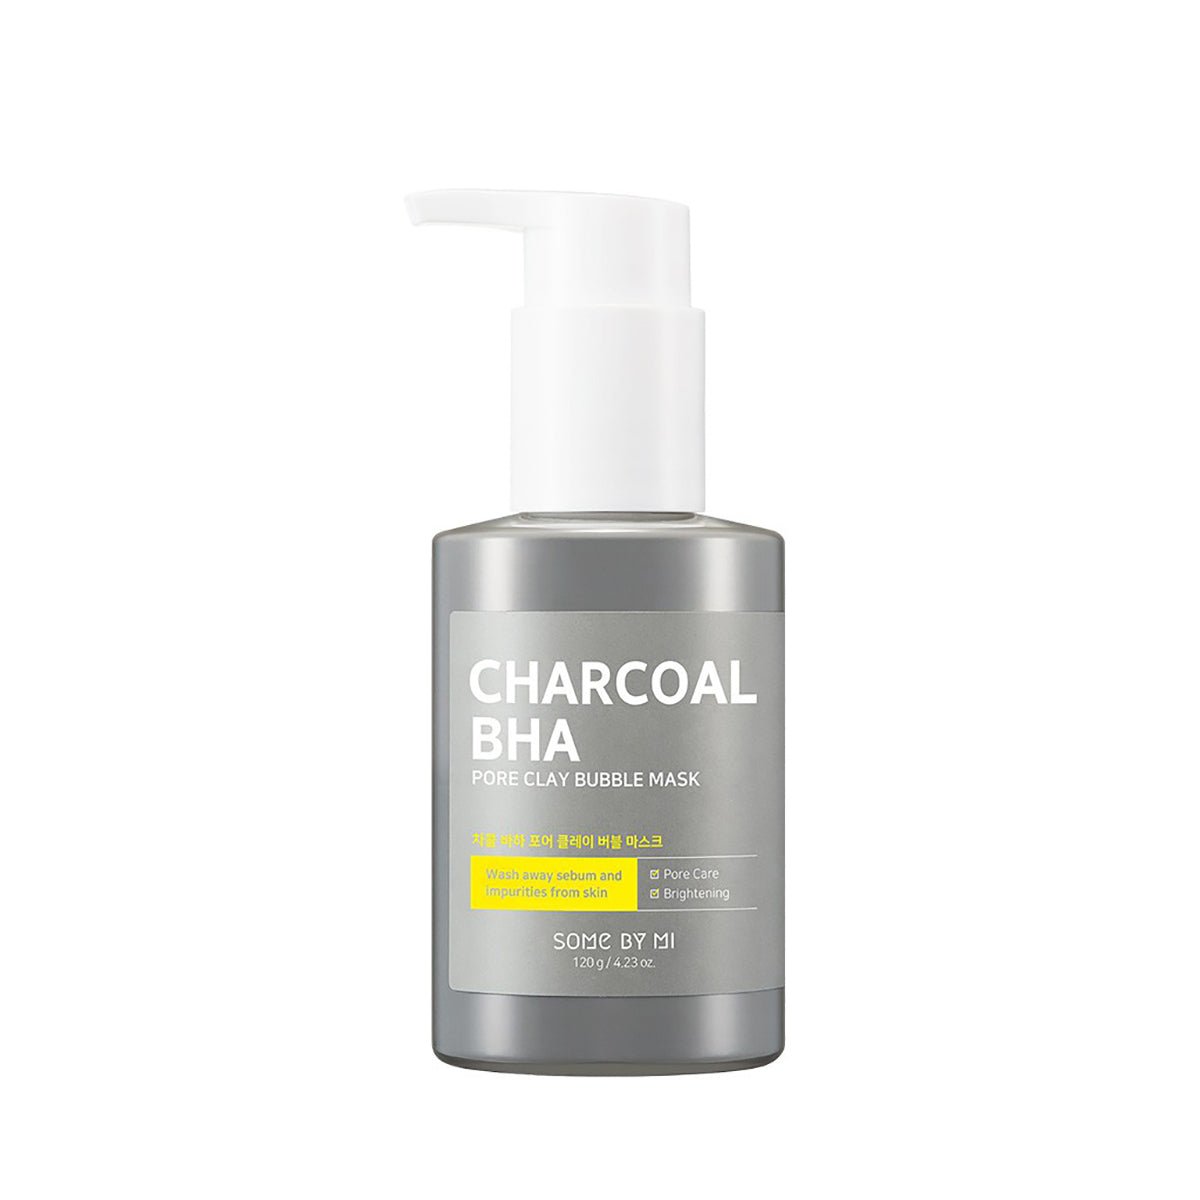 Charcoal BHA Pore Clay Bubble Mask Cleanser